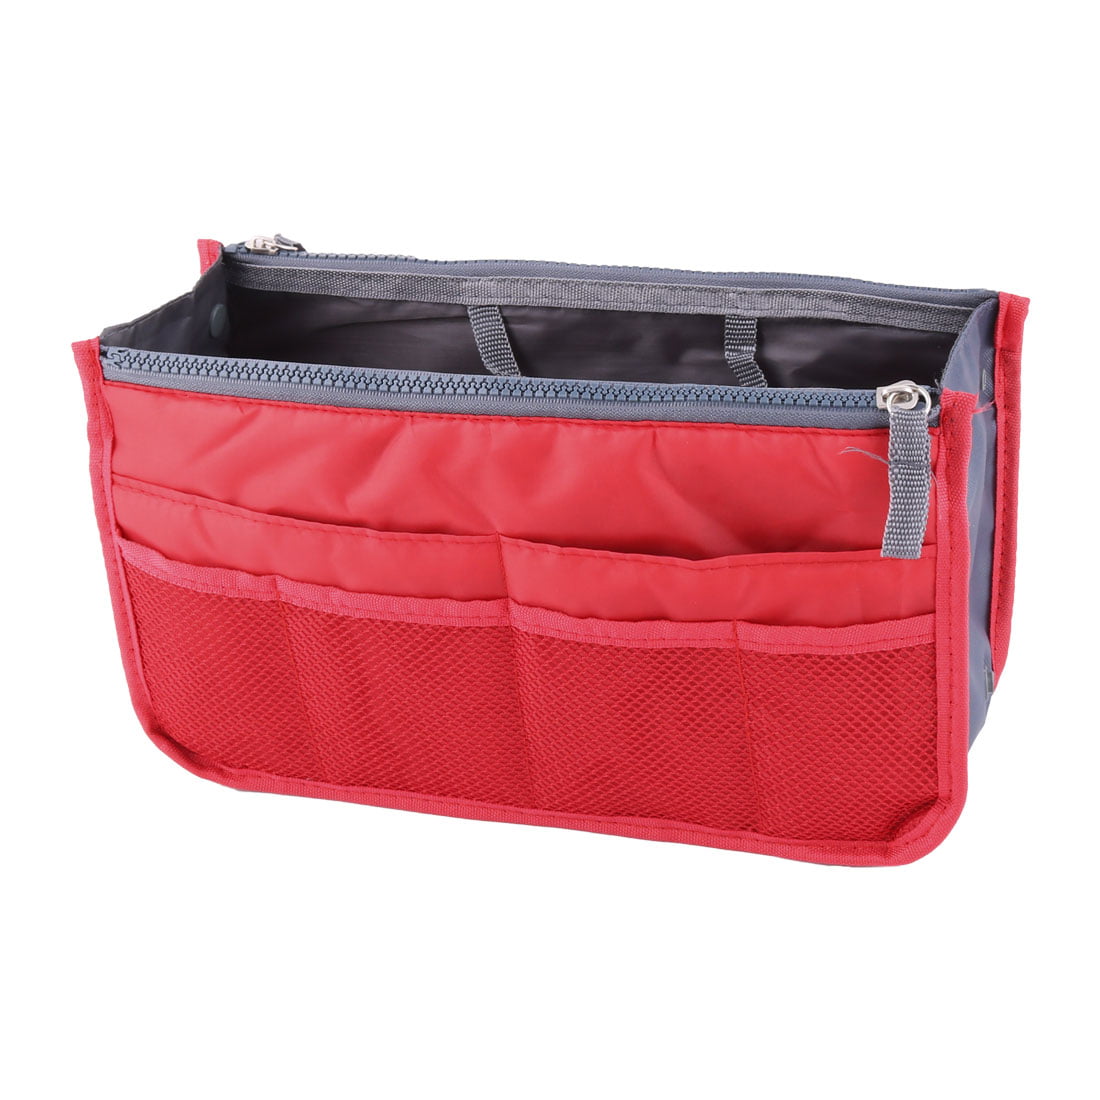 Unique BargainsOutdoor Nylon Zippered Drawer Dividers Cosmetic Organizer Travel Storage Bag Red ...